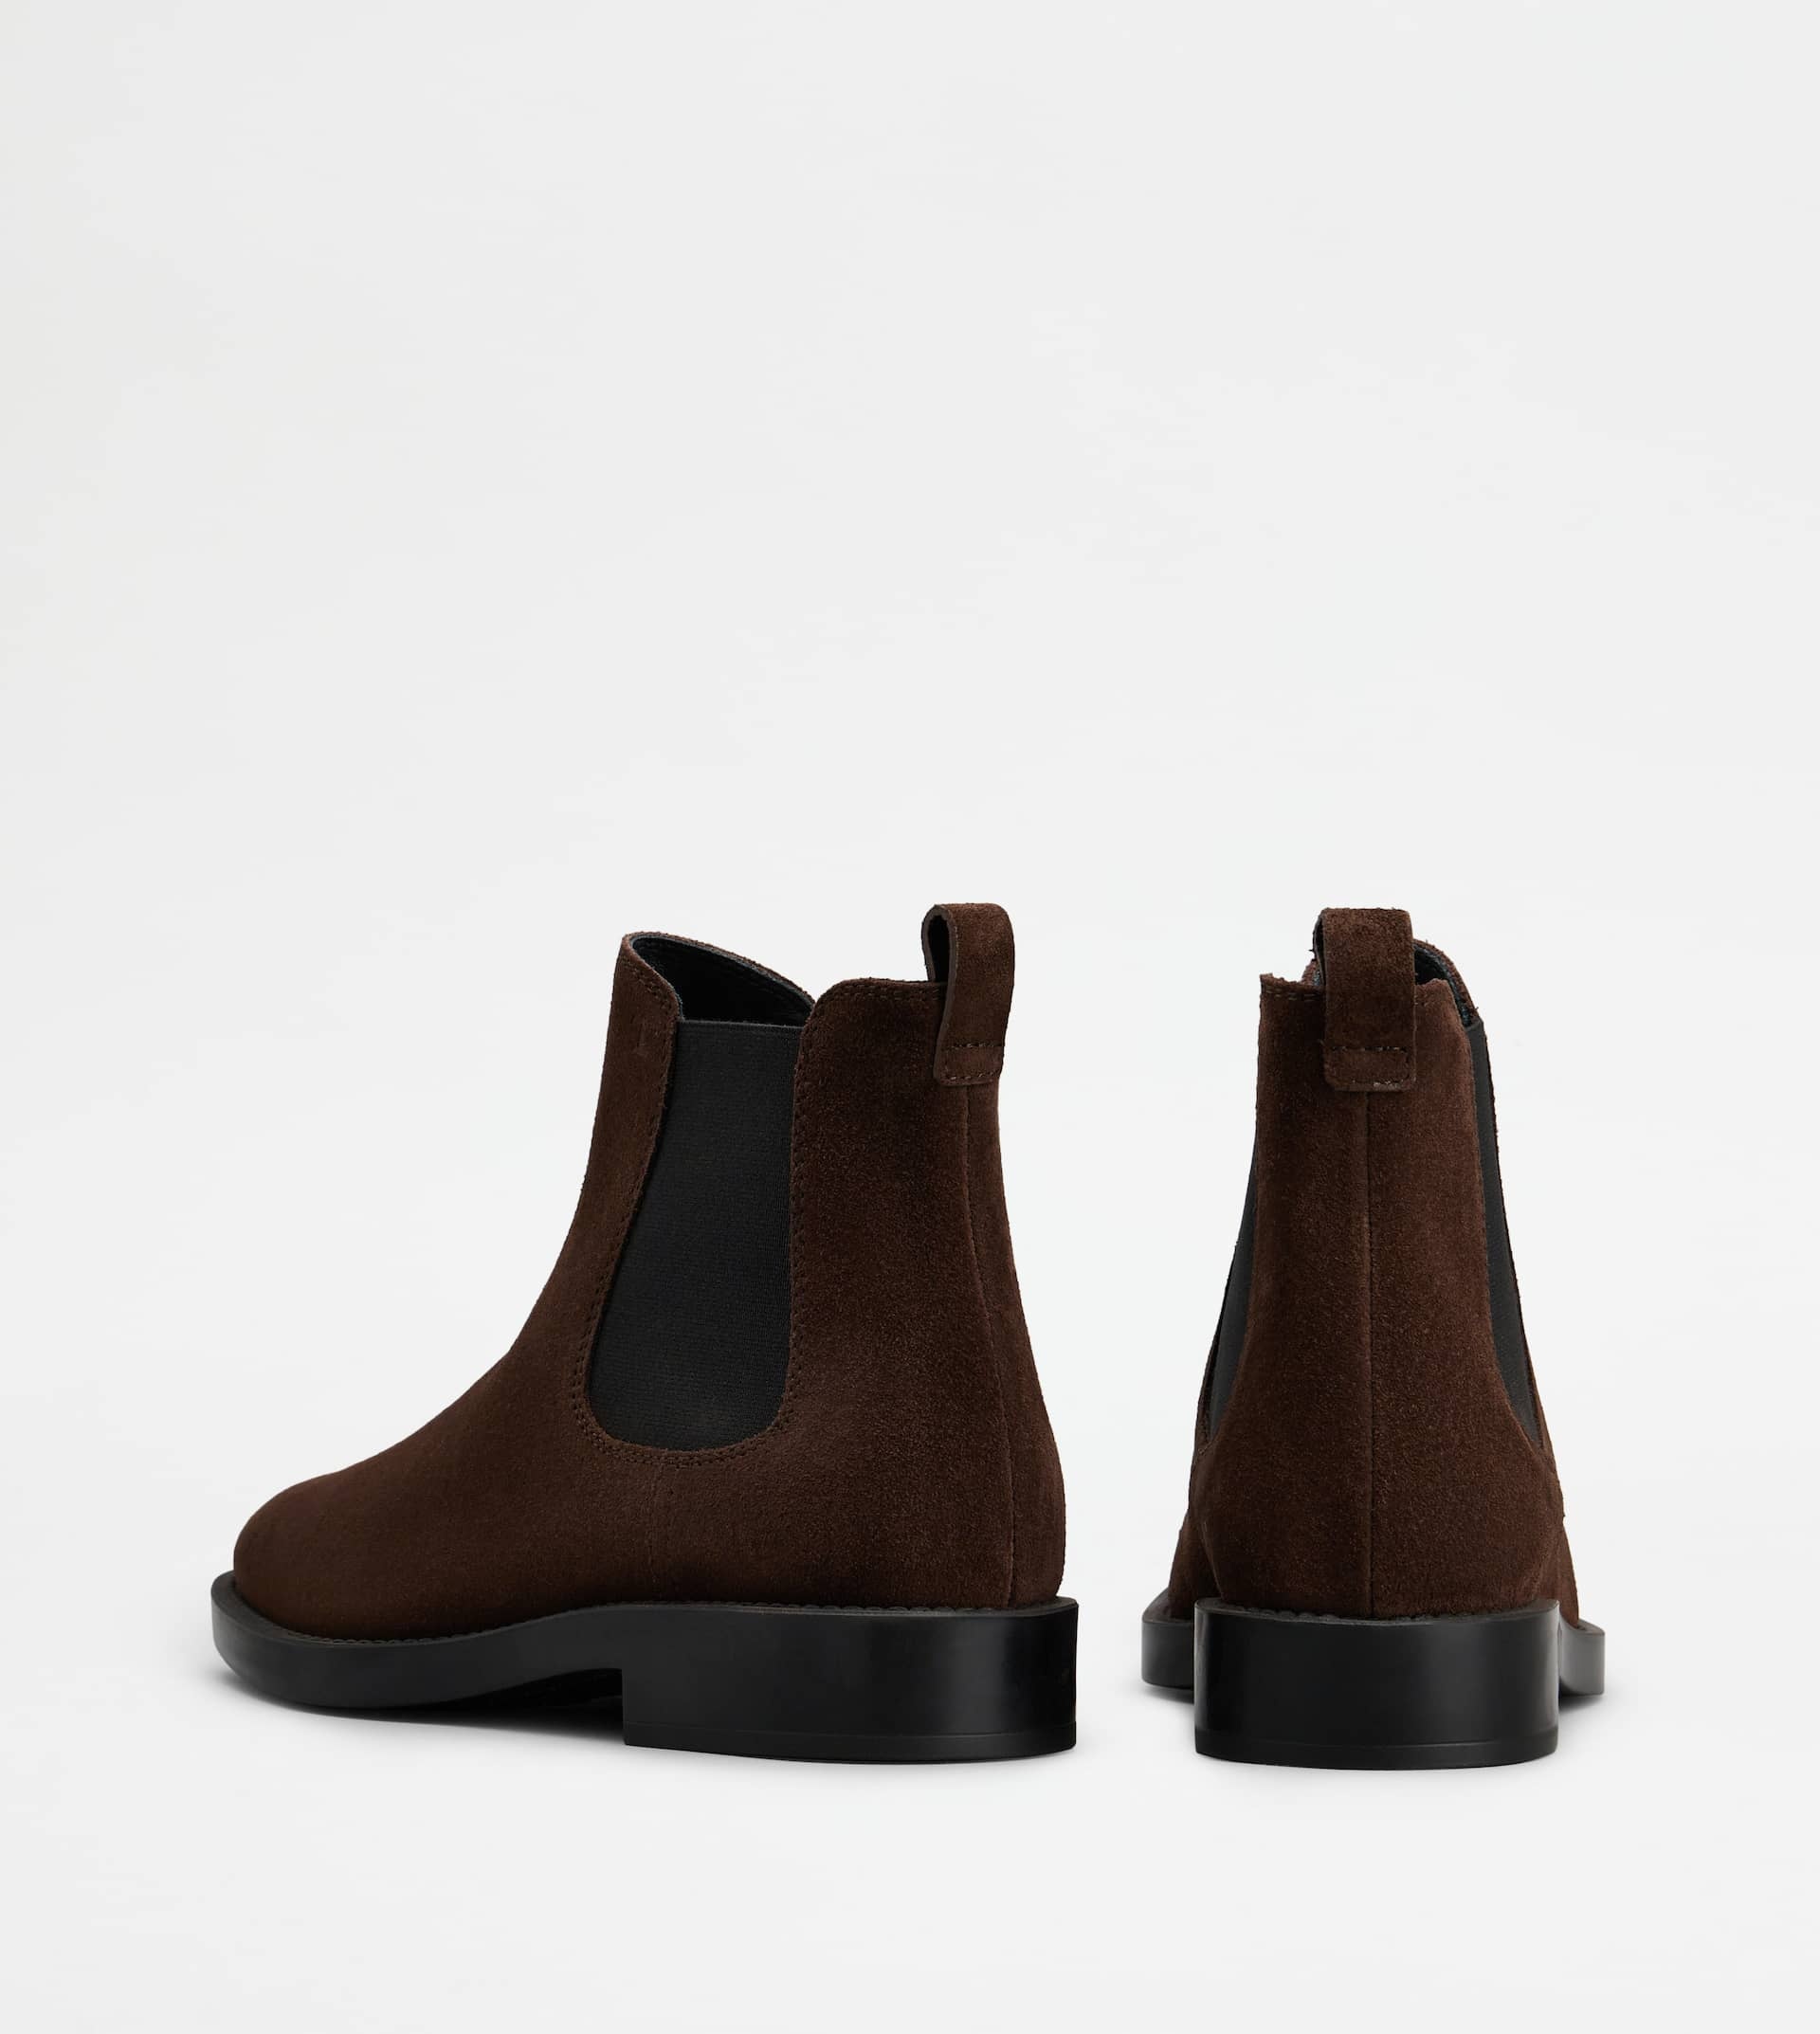 ANKLE BOOTS IN SUEDE - BROWN - 2